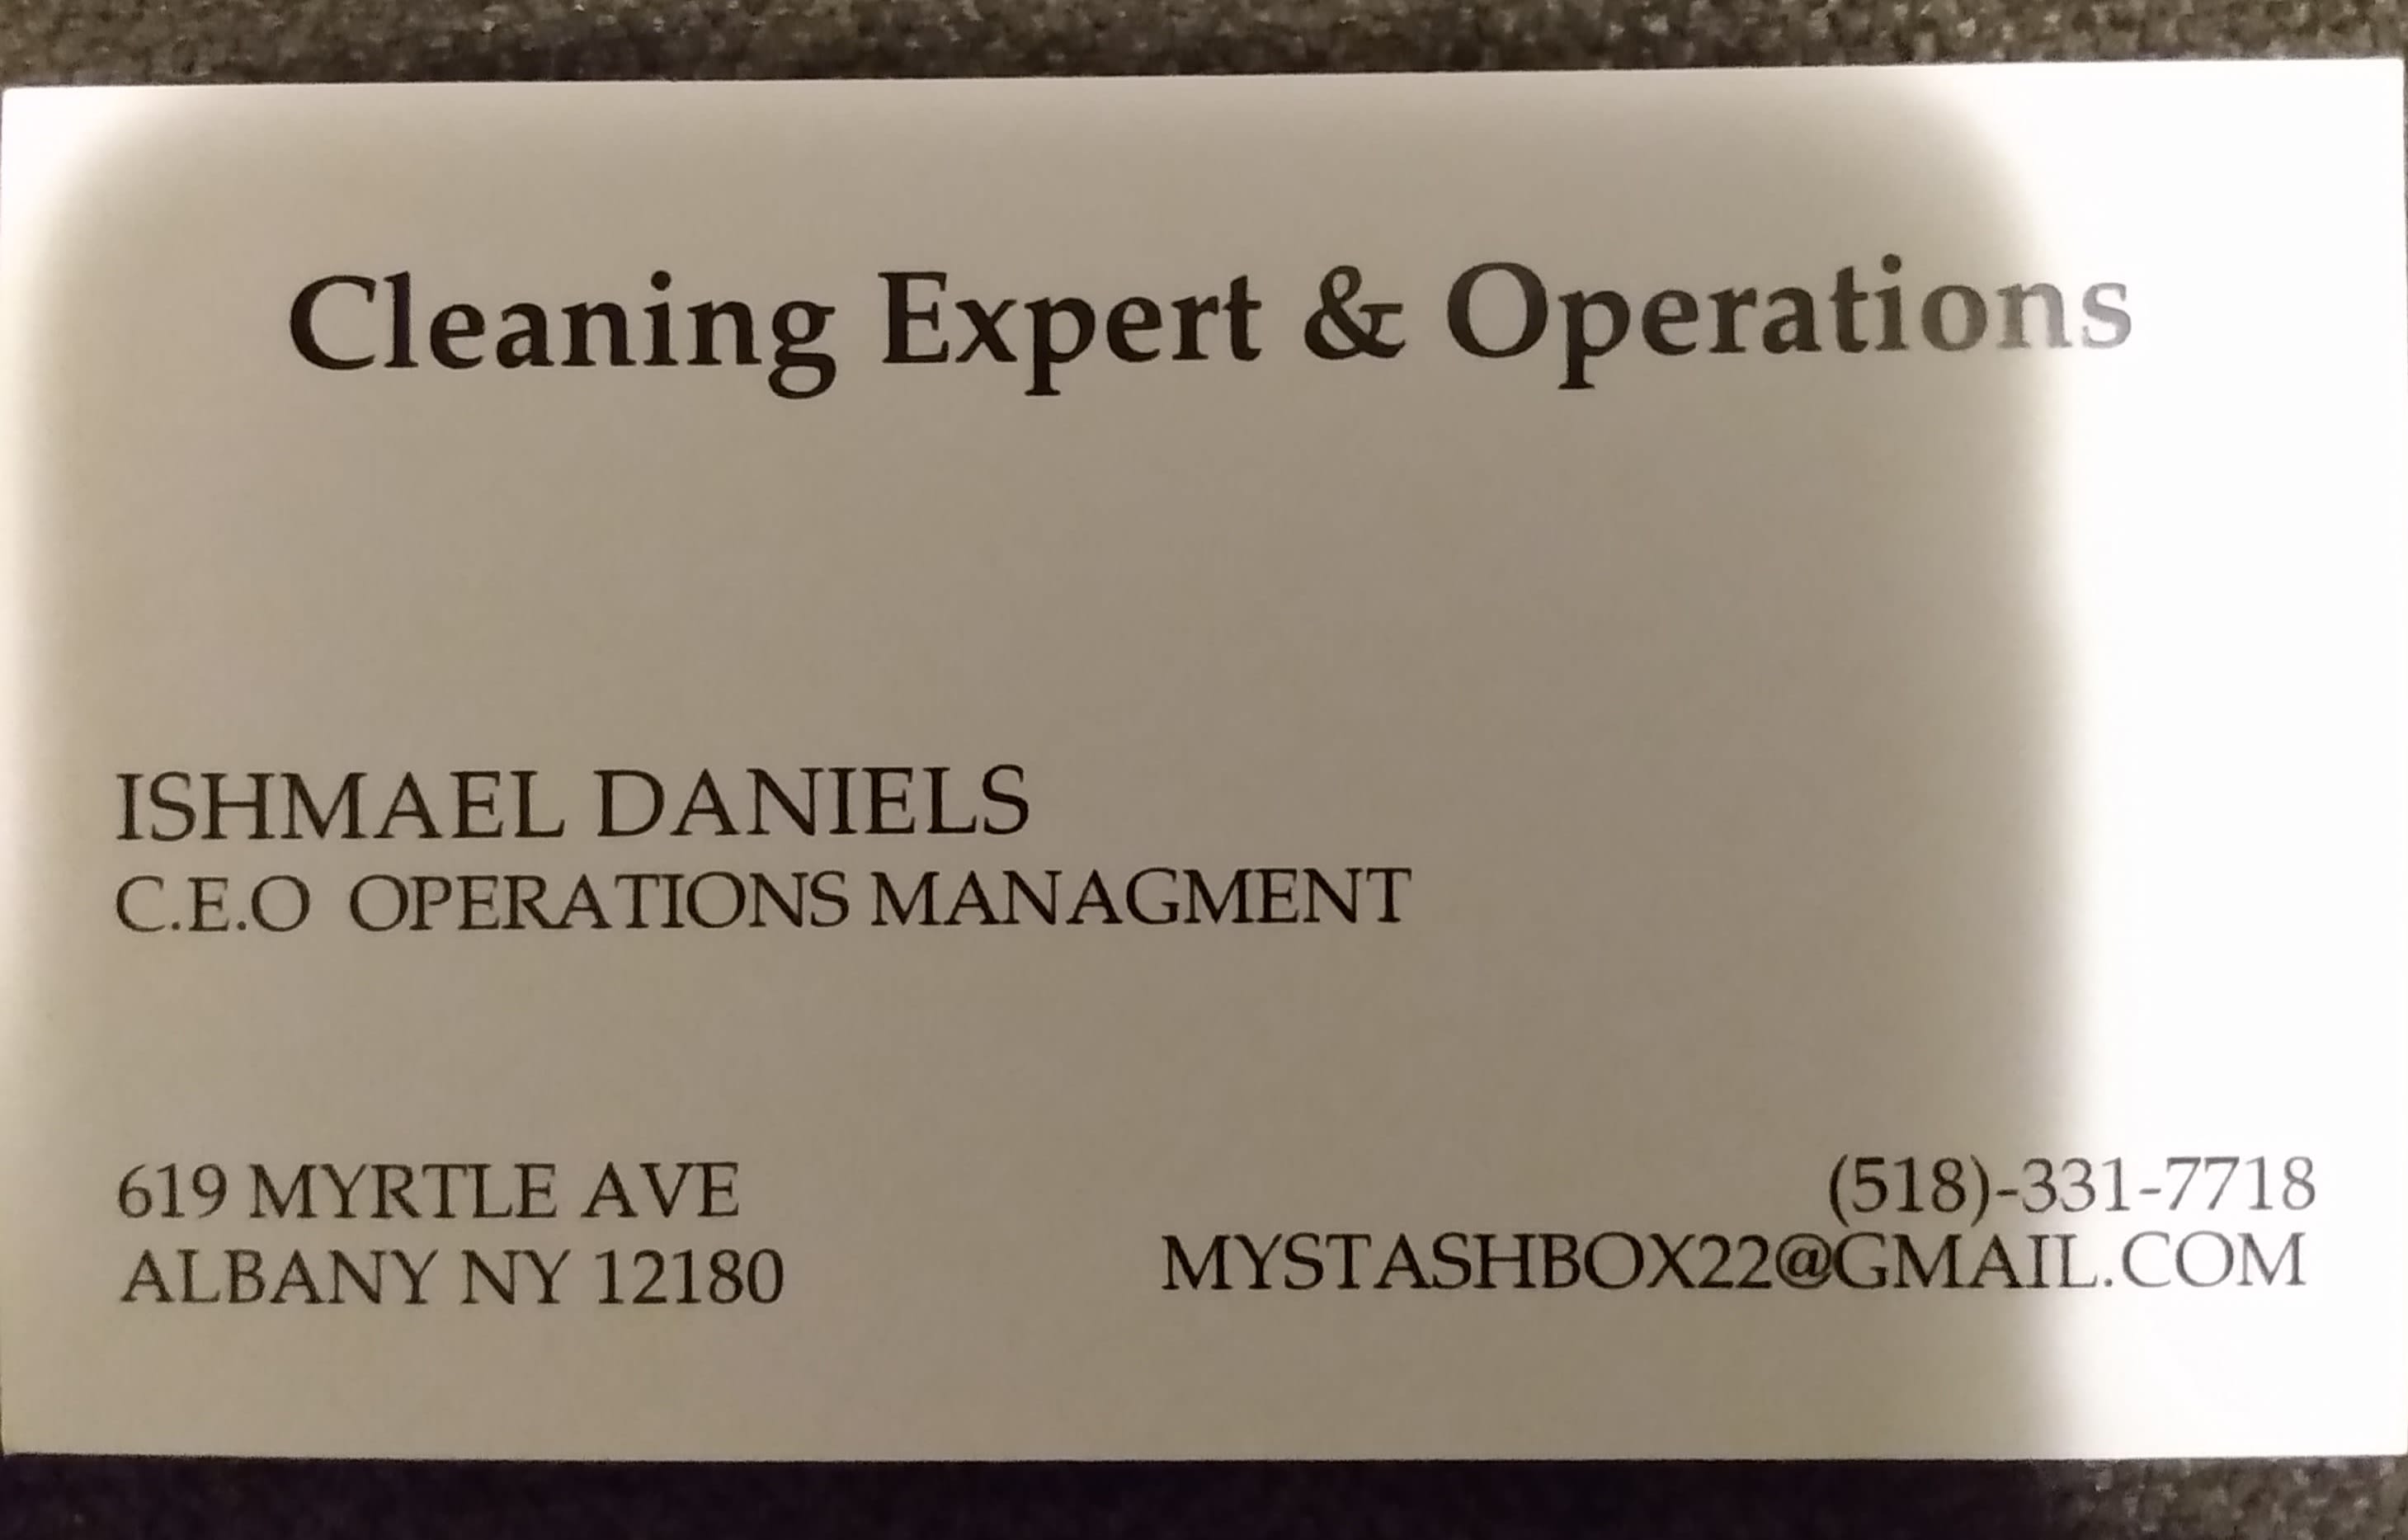 Cleaning Experts & Operations